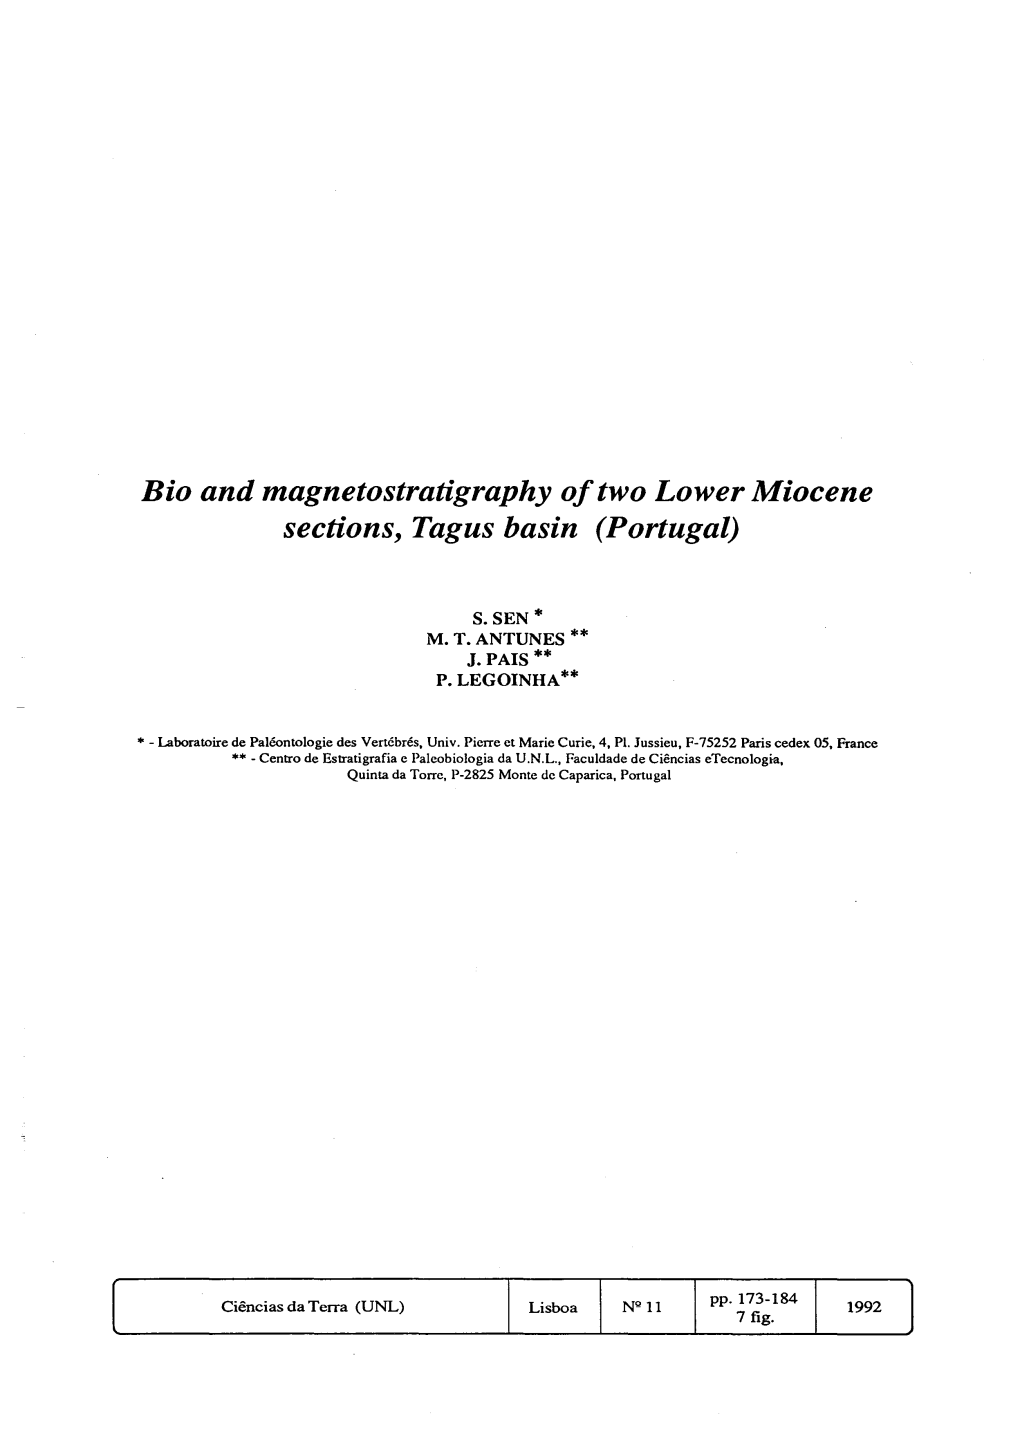 Bio and Magnetostratigraphy Oftwo Lower Miocene Sections, Tagus Basin (Portugal)